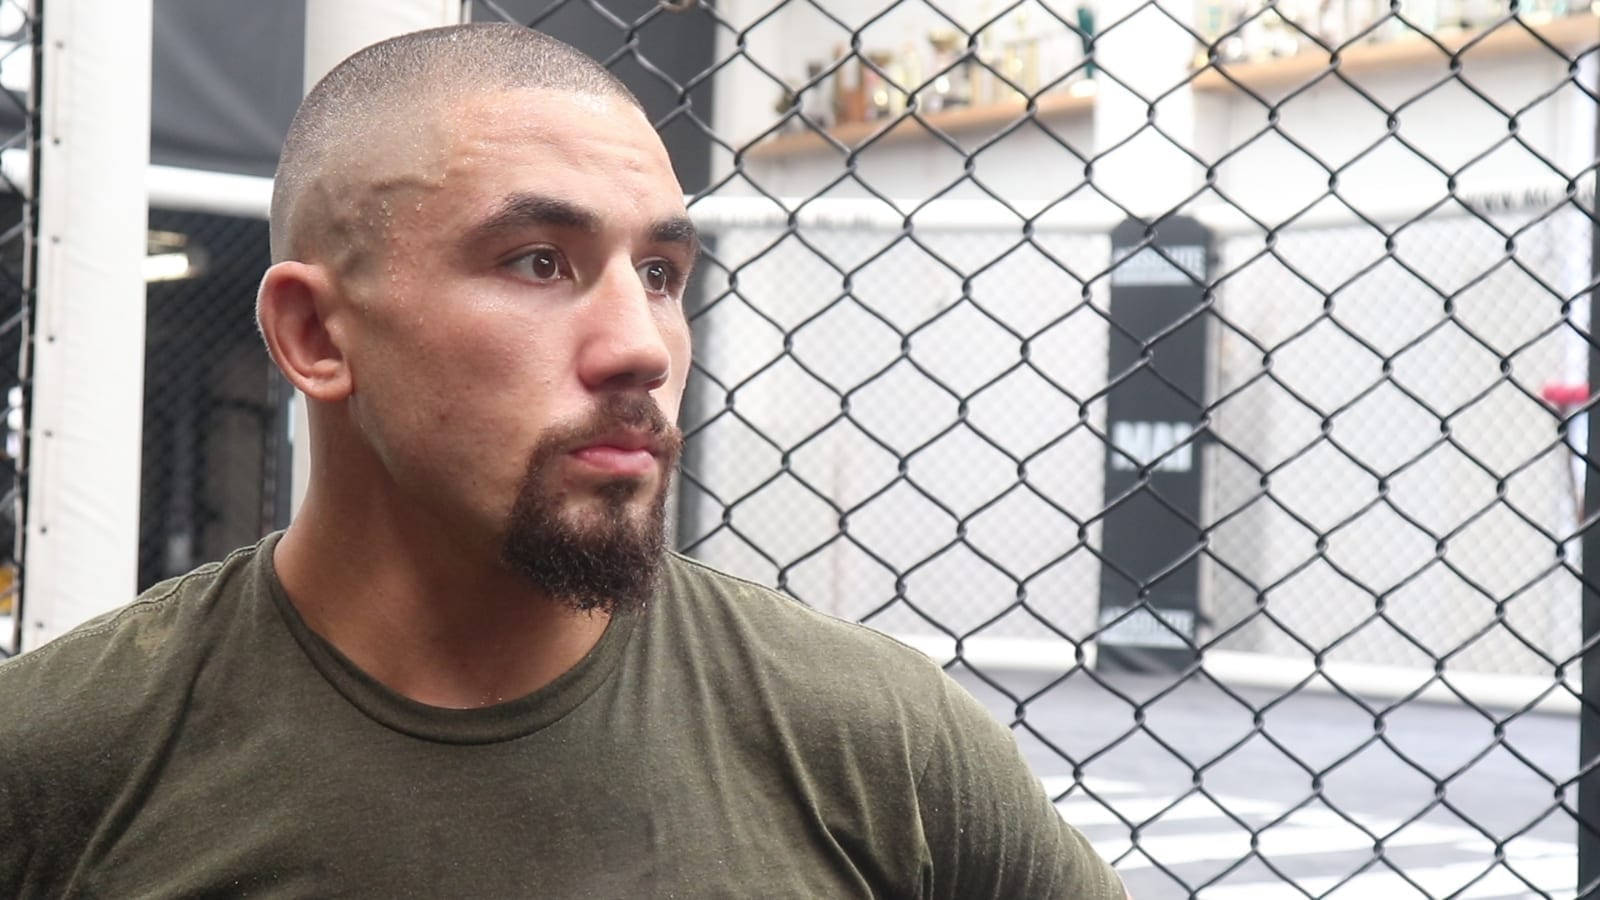 Robert Whittaker Against Octagon Cage Wallpaper